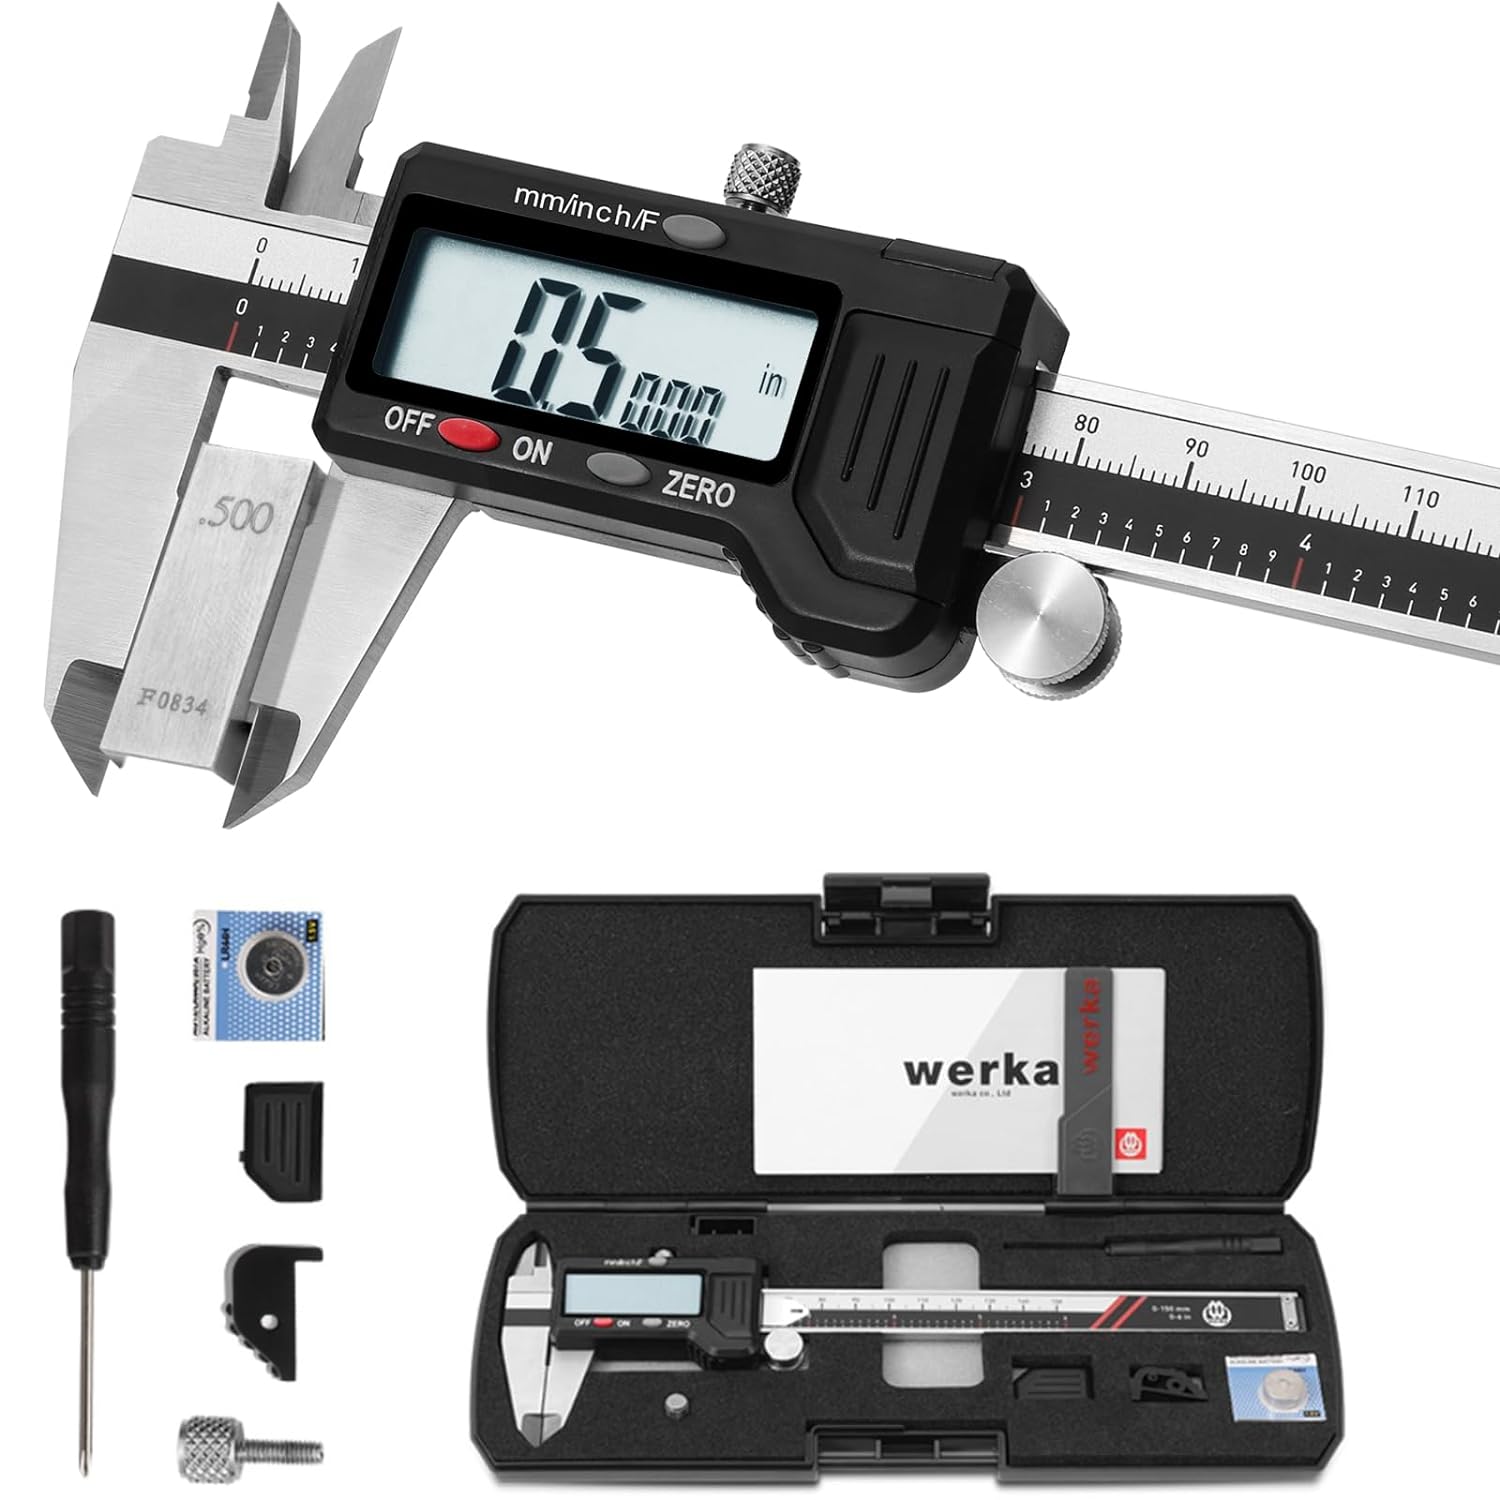 Digital Caliper, 0-6 Calipers Measuring Tool, Micrometer Caliper with 0.001High-Accuracy,Inch/Fraction/Millimeter Conversions Button,4 Measuring Ways, Stainless Steel Construction 6000150